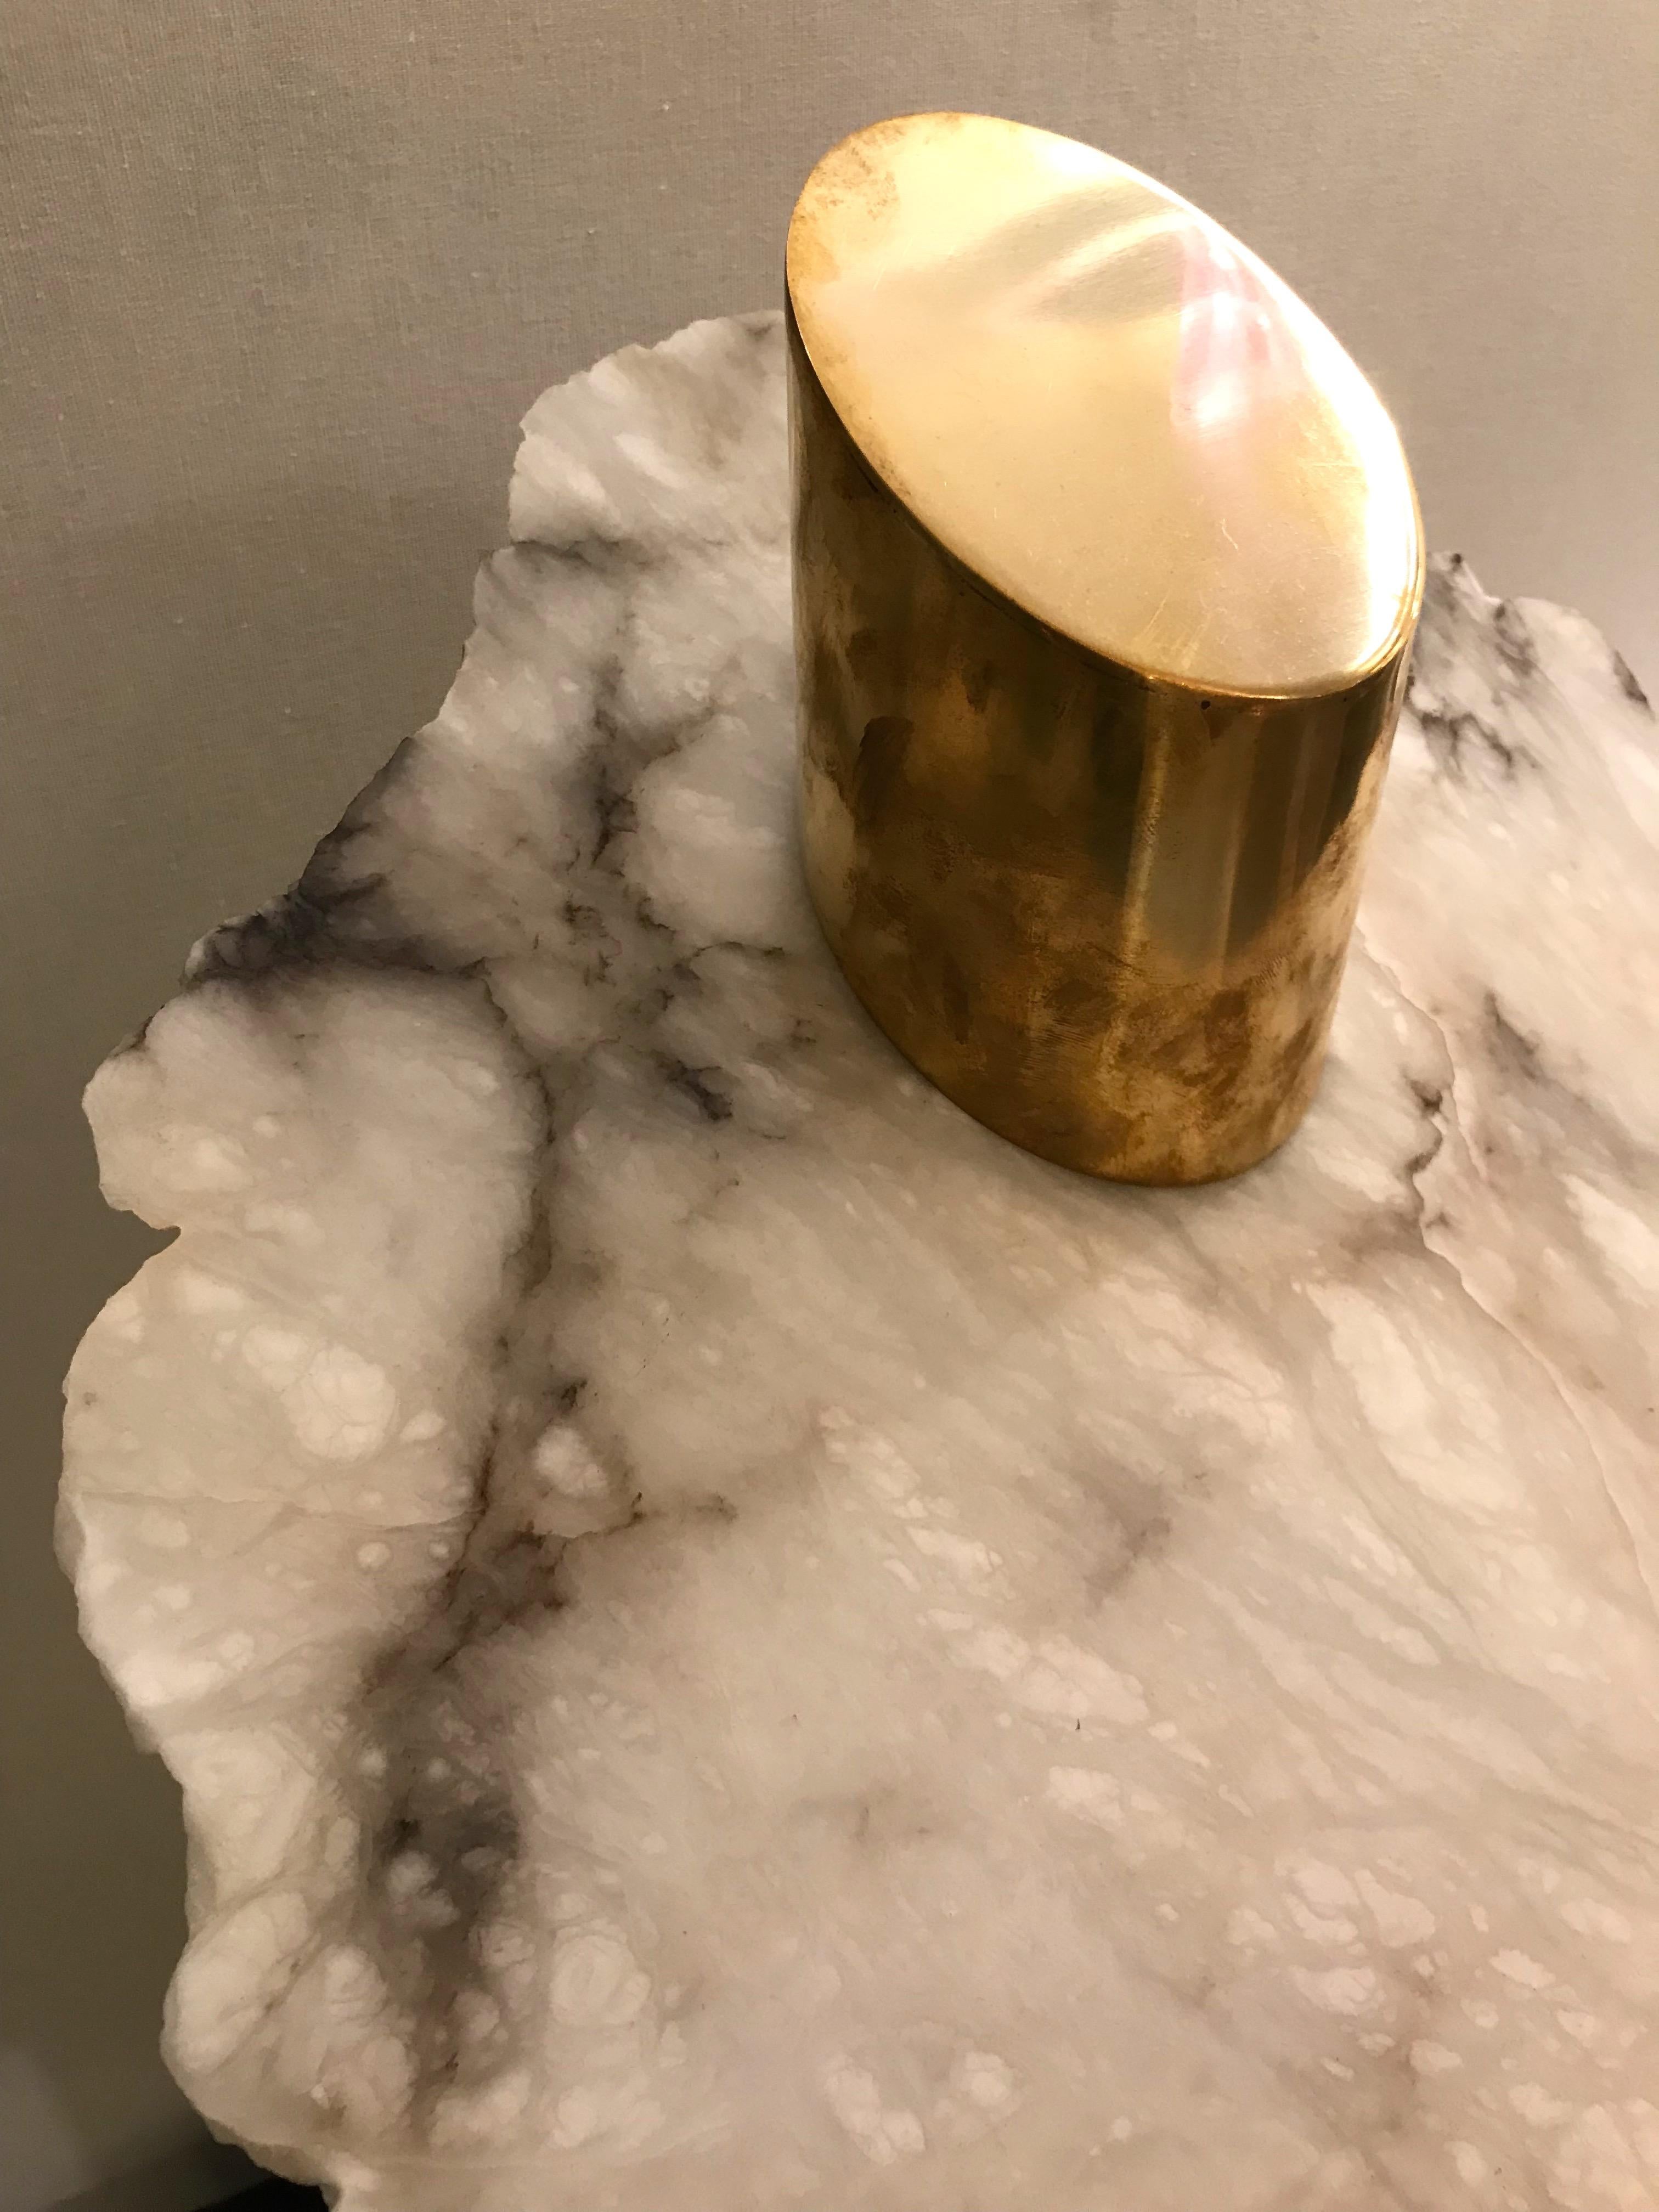 Contemporary TOTEM lamps. Brass and natural slice or leaves of Alabaster. The best Alabaster from Carrare Tuscany Italy. Few exclusive production from a small Italian workshop. Very quality and unusual work, different from marble works. Price by